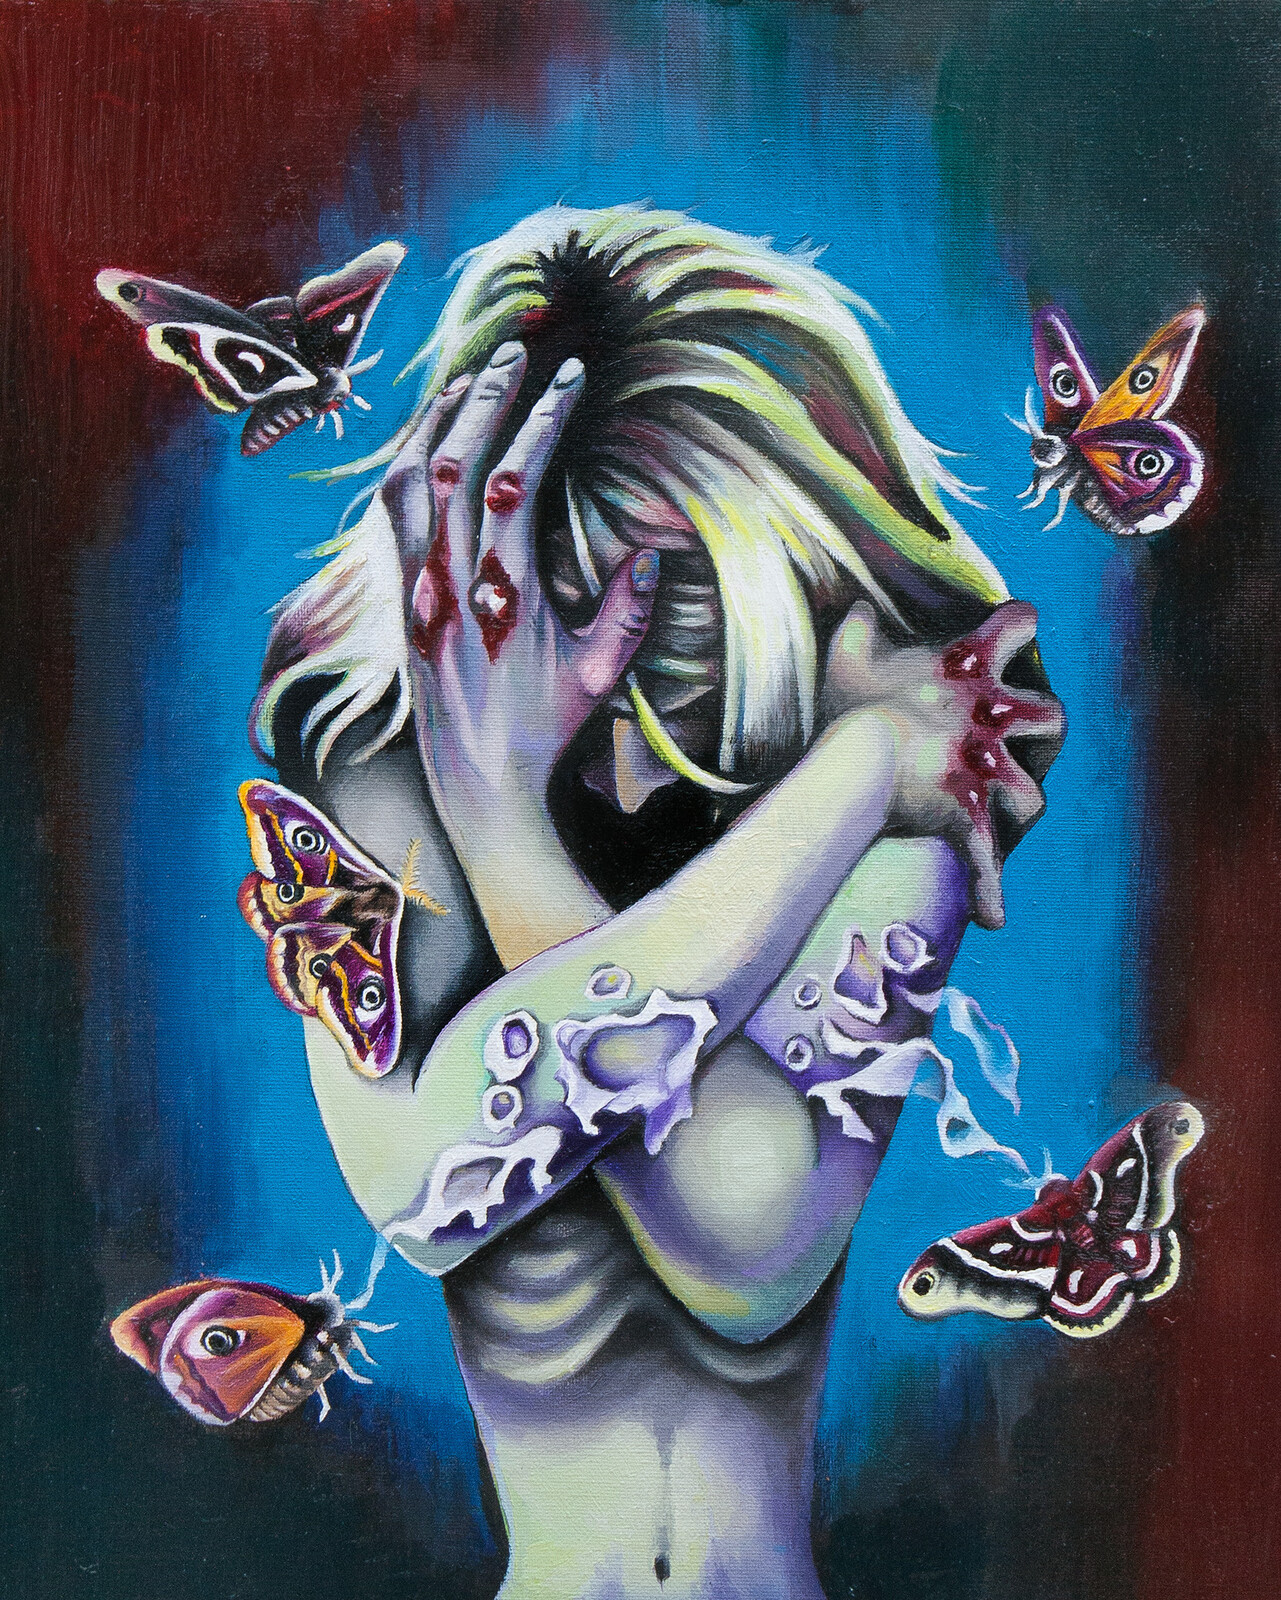 Self-Portrait with Moths, 2014, oil on canvas panel.